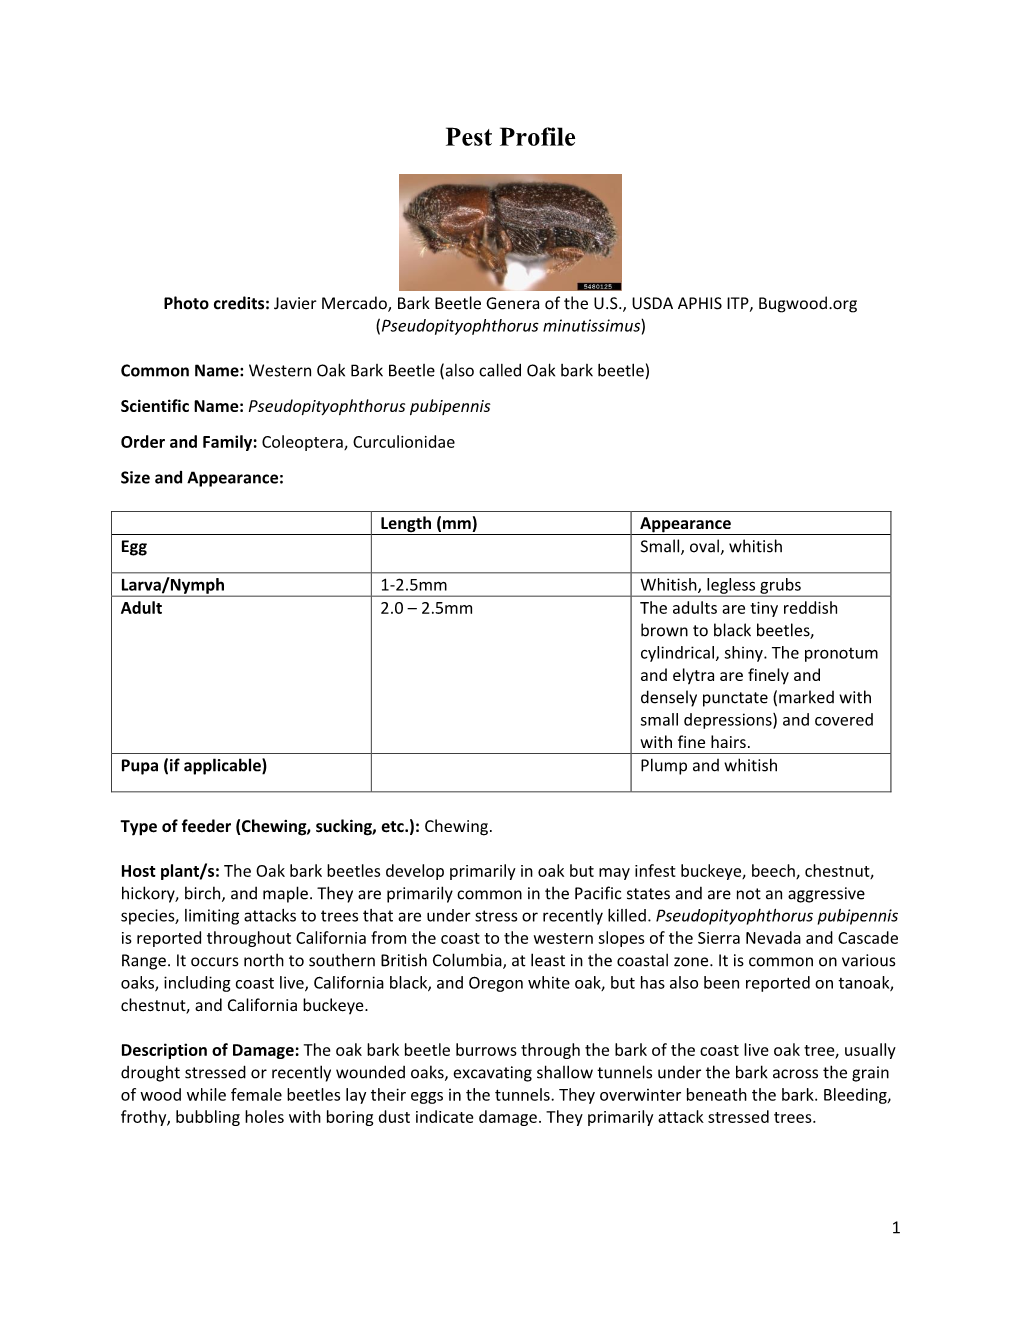 Oak Bark Beetle (Also Called Oak Bark Beetle) Scientific Name: Pseudopityophthorus Pubipennis Order and Family: Coleoptera, Curculionidae Size and Appearance